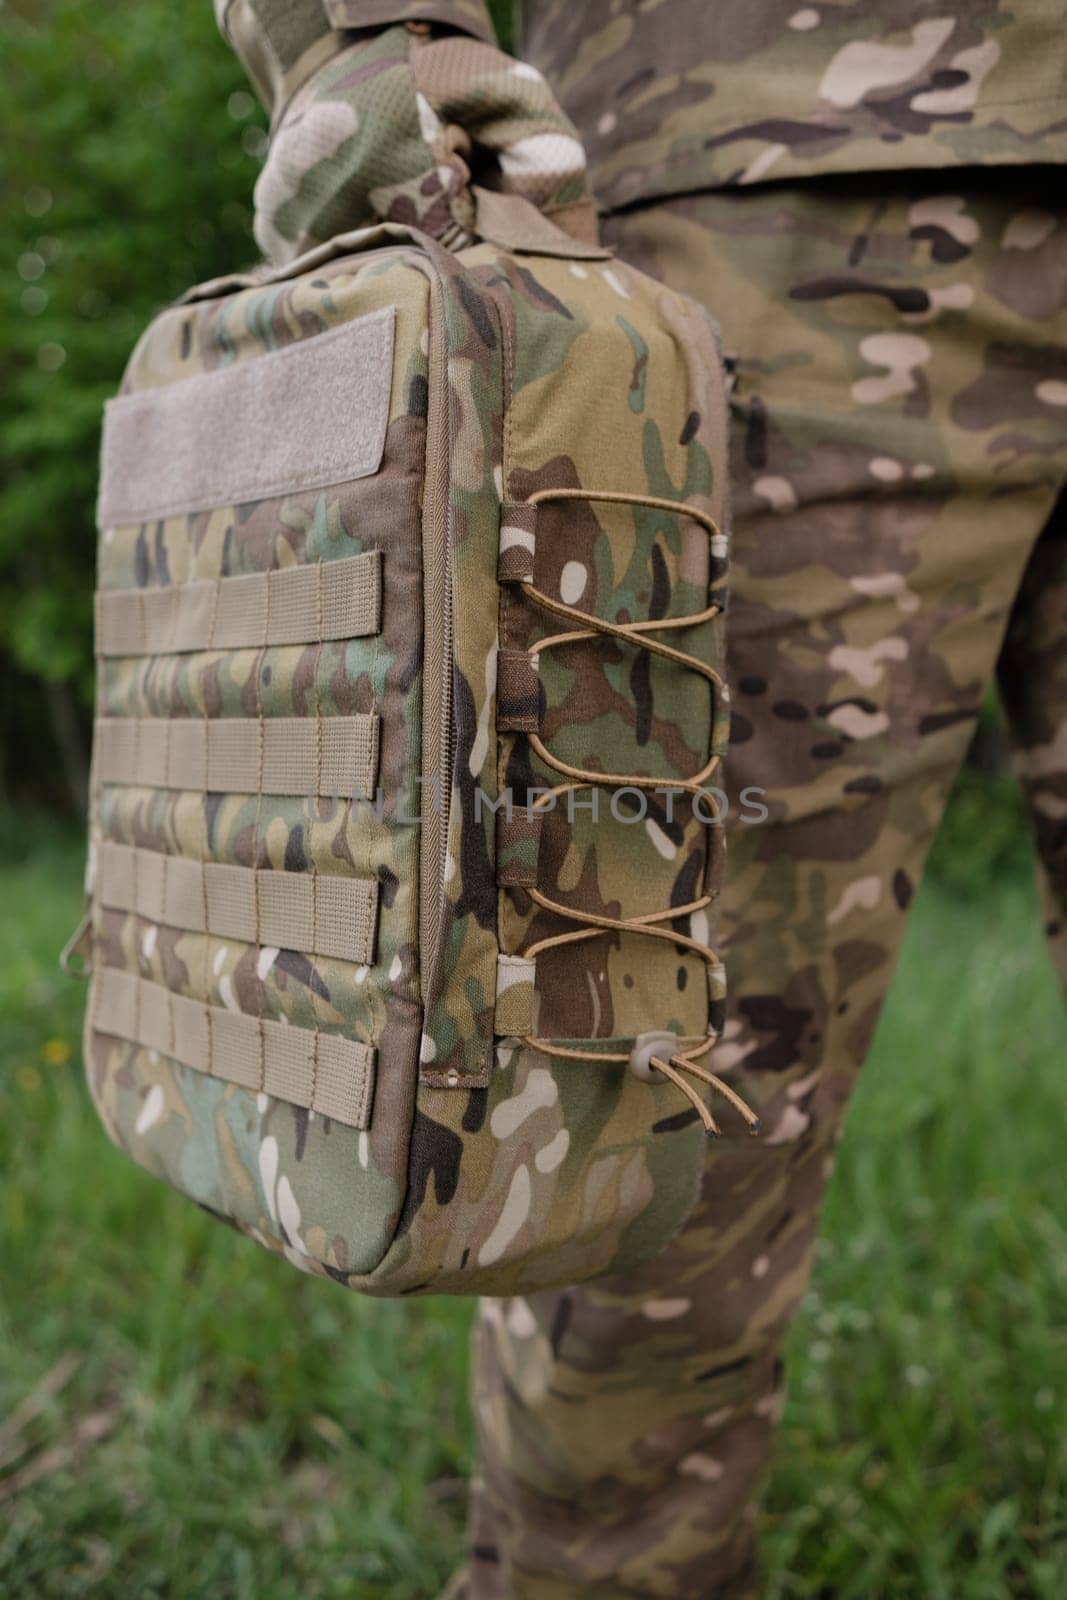 Close-up of Tactical Backpack Details on Soldier in Forest